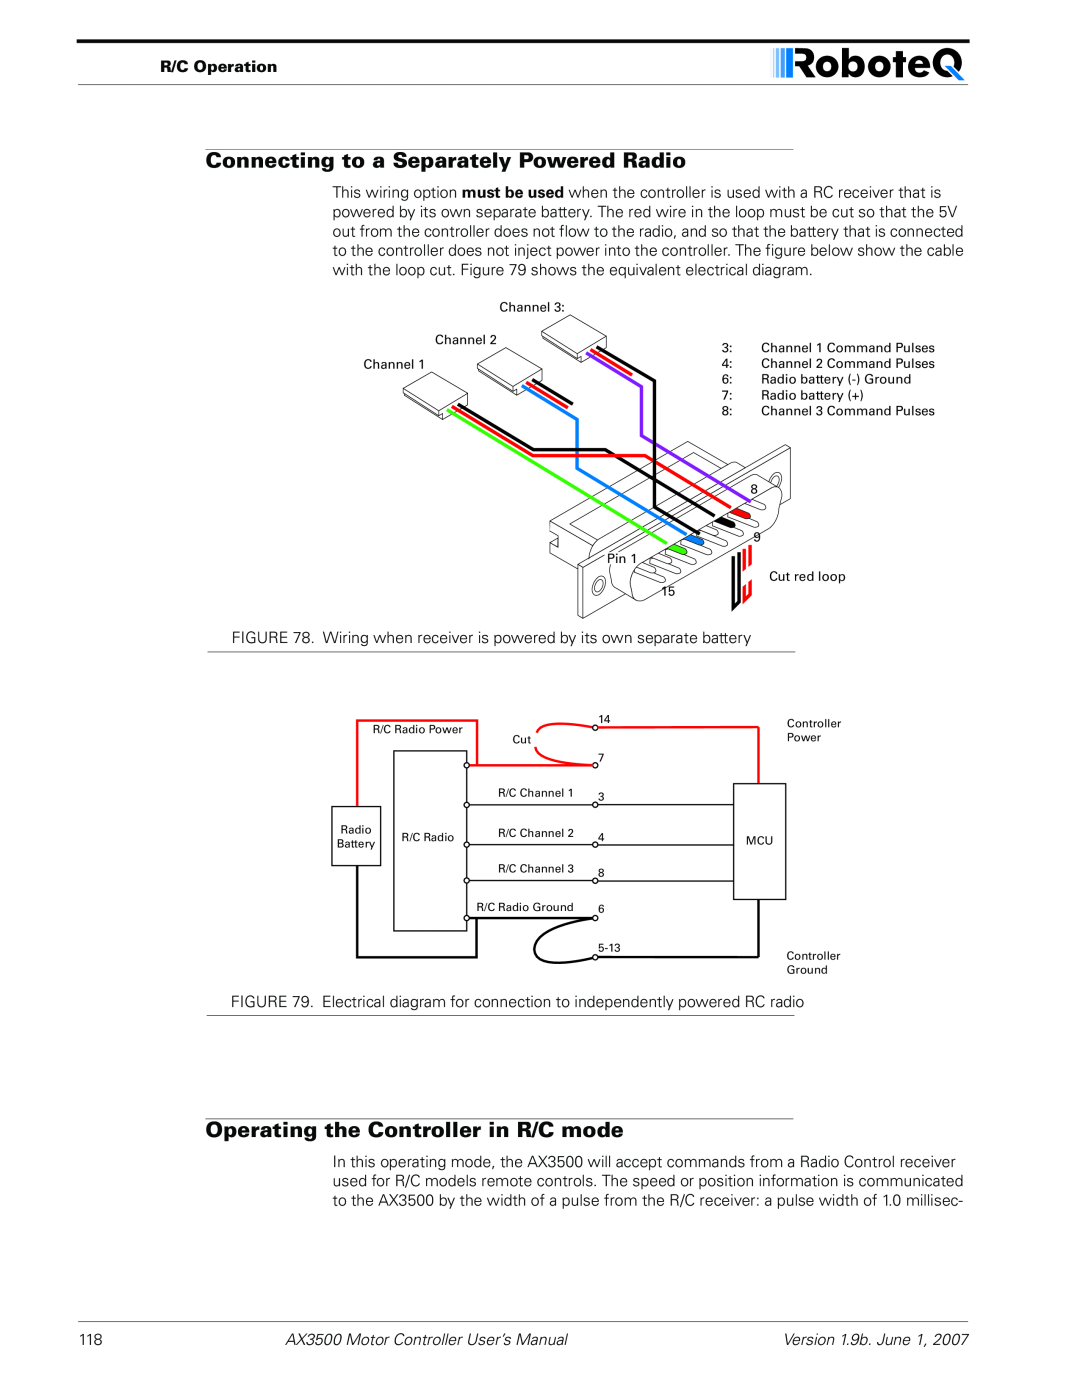 RoboteQ AX3500 user manual Connecting to a Separately Powered Radio, Operating the Controller in R/C mode, R/C Operation 